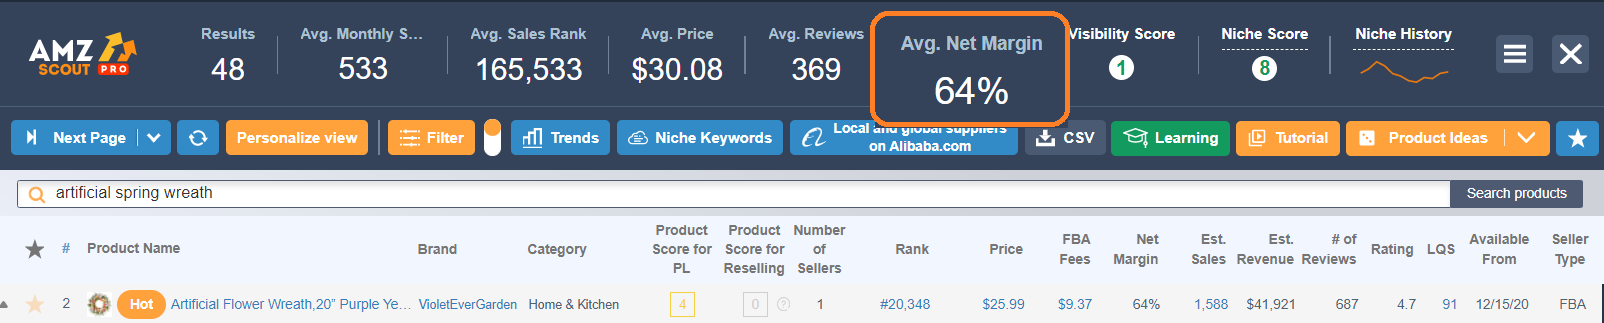 Check average net margin for the niche in AMZScout PRO